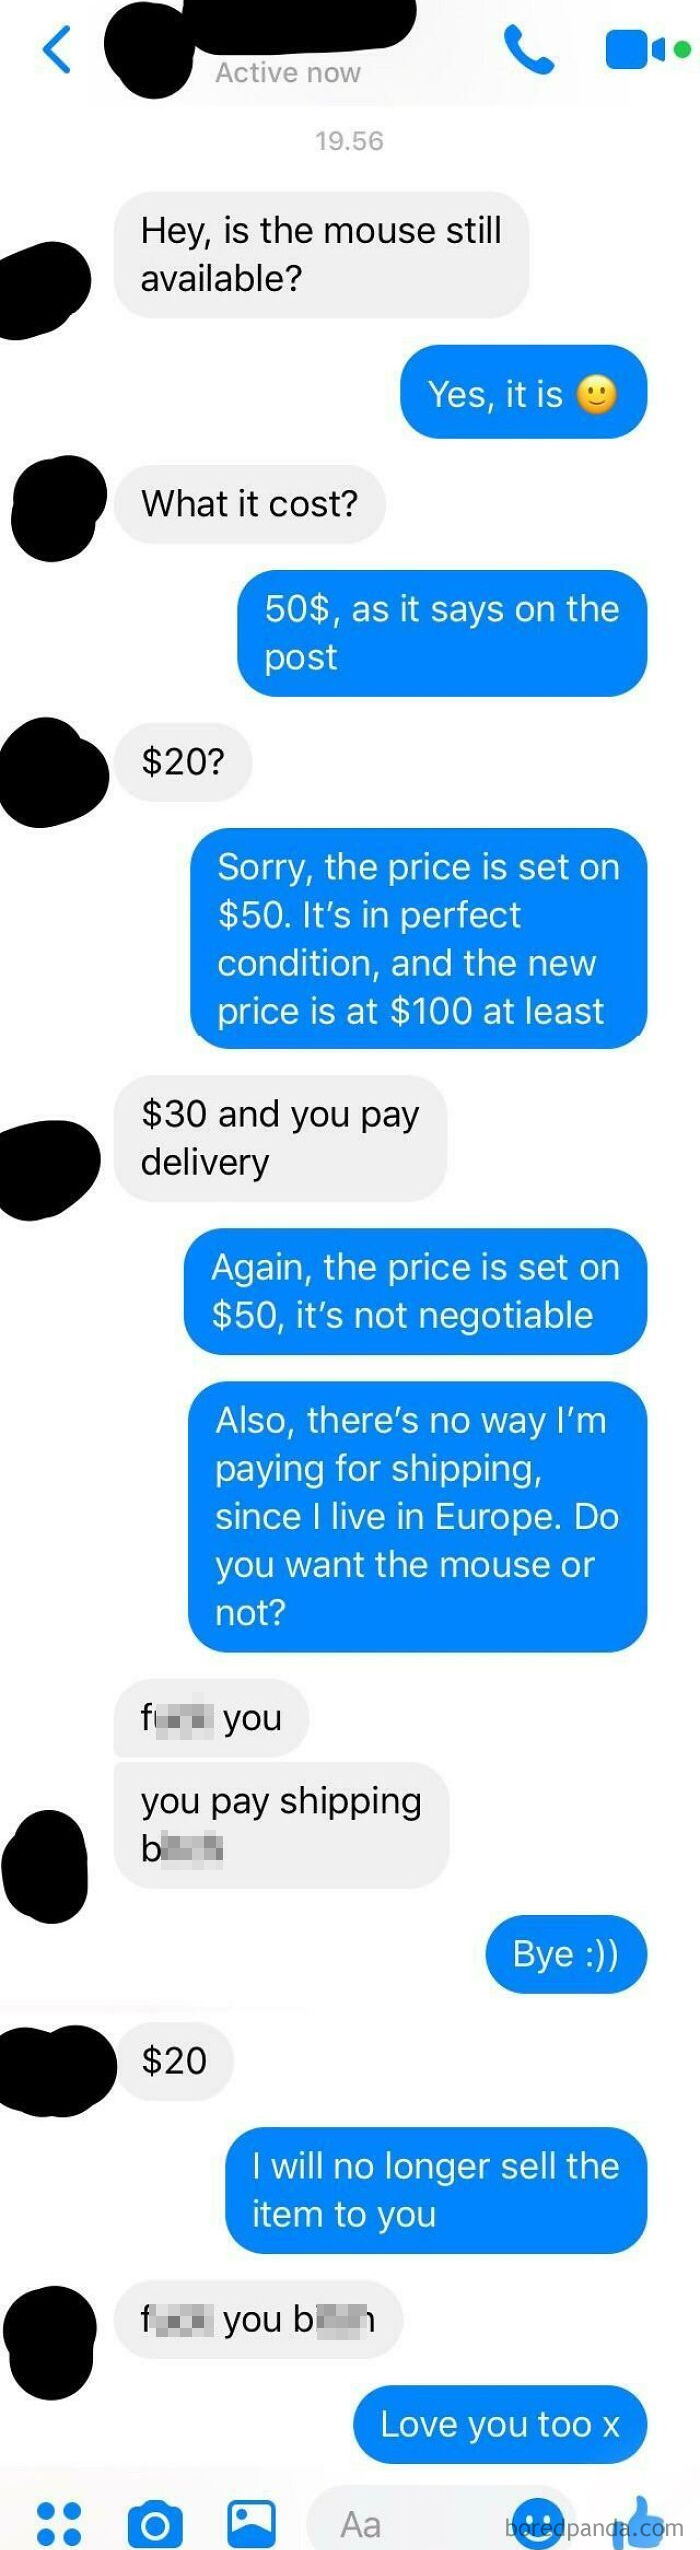 Never Thought I’d Encounter One Myself, Guess That’s What Happens When You Sell Stuff Online